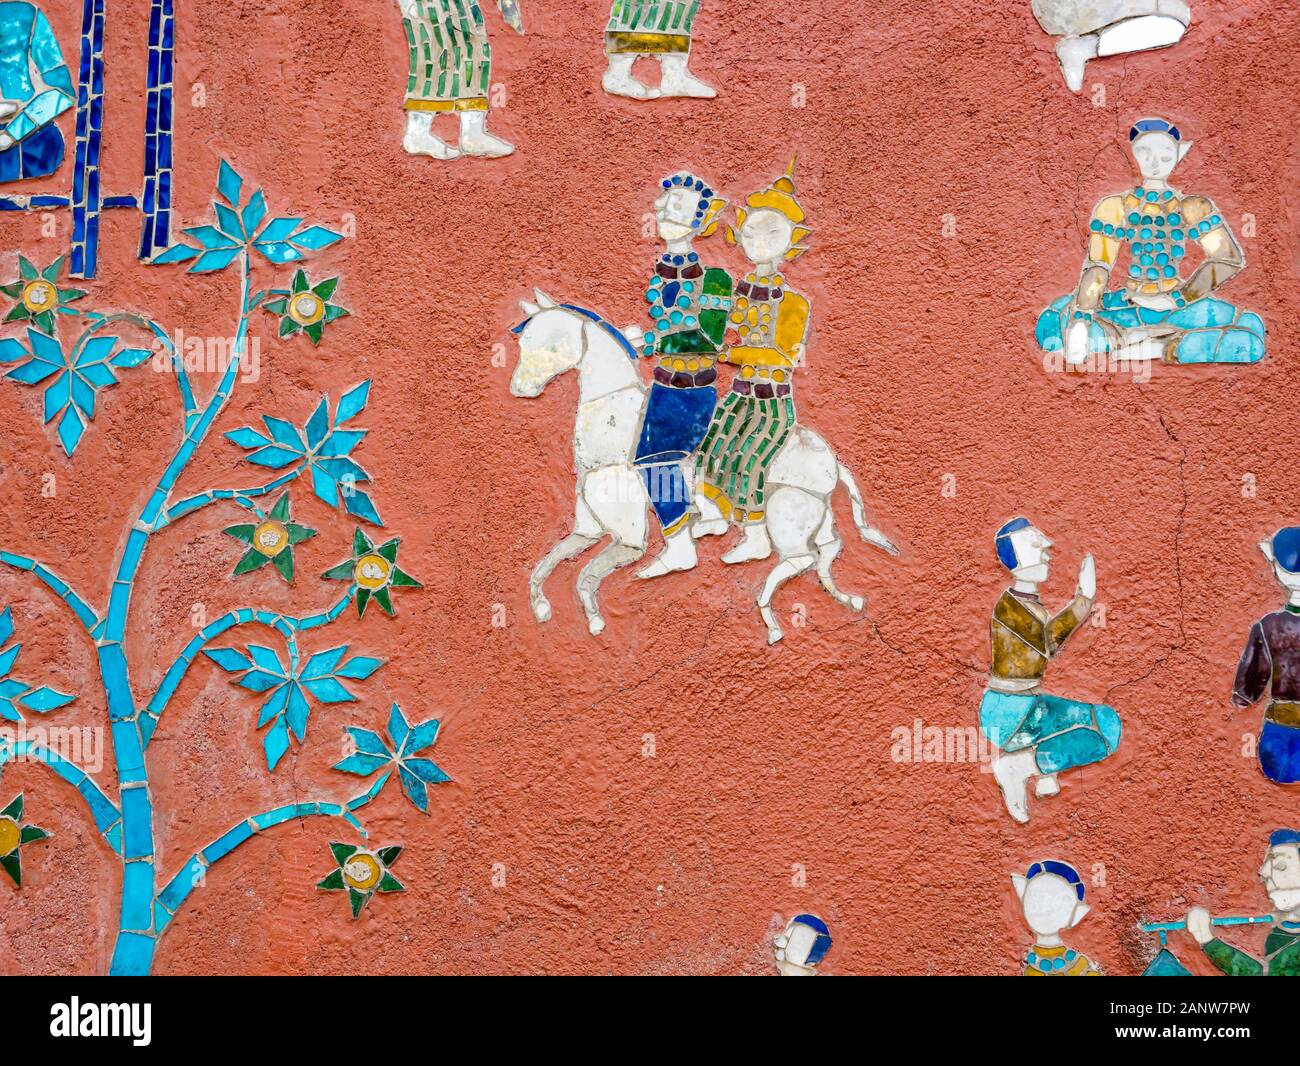 Colourful mosaic story depiction with couple on horseback, Wat Xien Thong temple, Luang Prabang, Laos, Southeast Asia Stock Photo